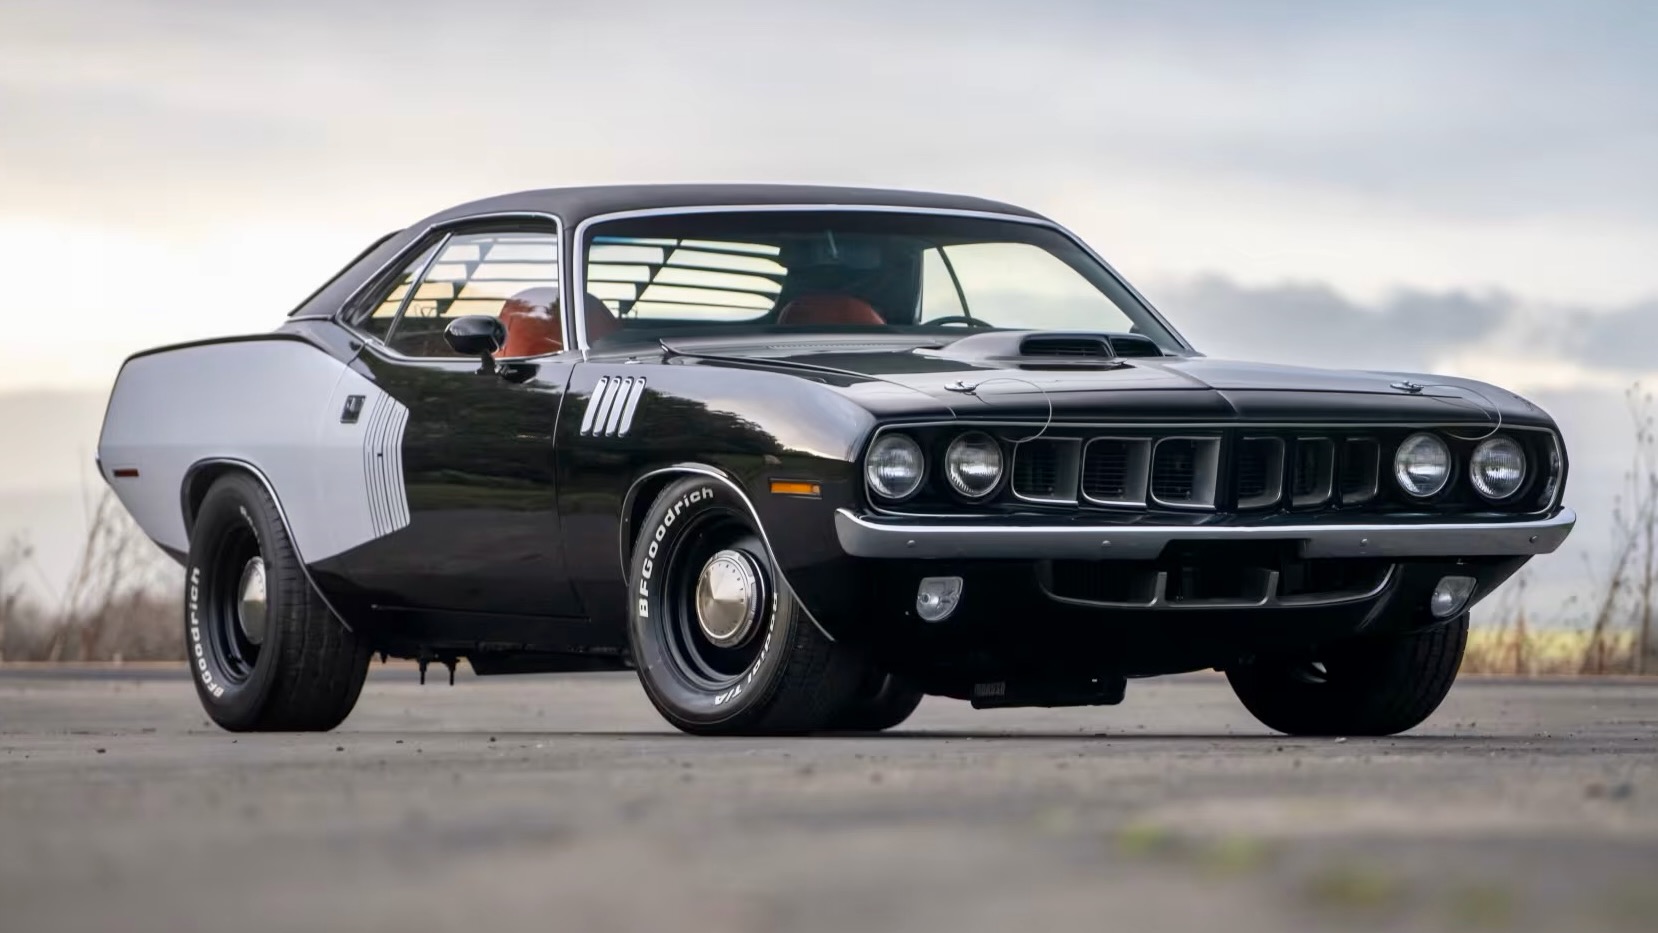 Classic Muscle Car Alert: Iconic 1971 Plymouth HEMI® ‘Cuda Up for Auction